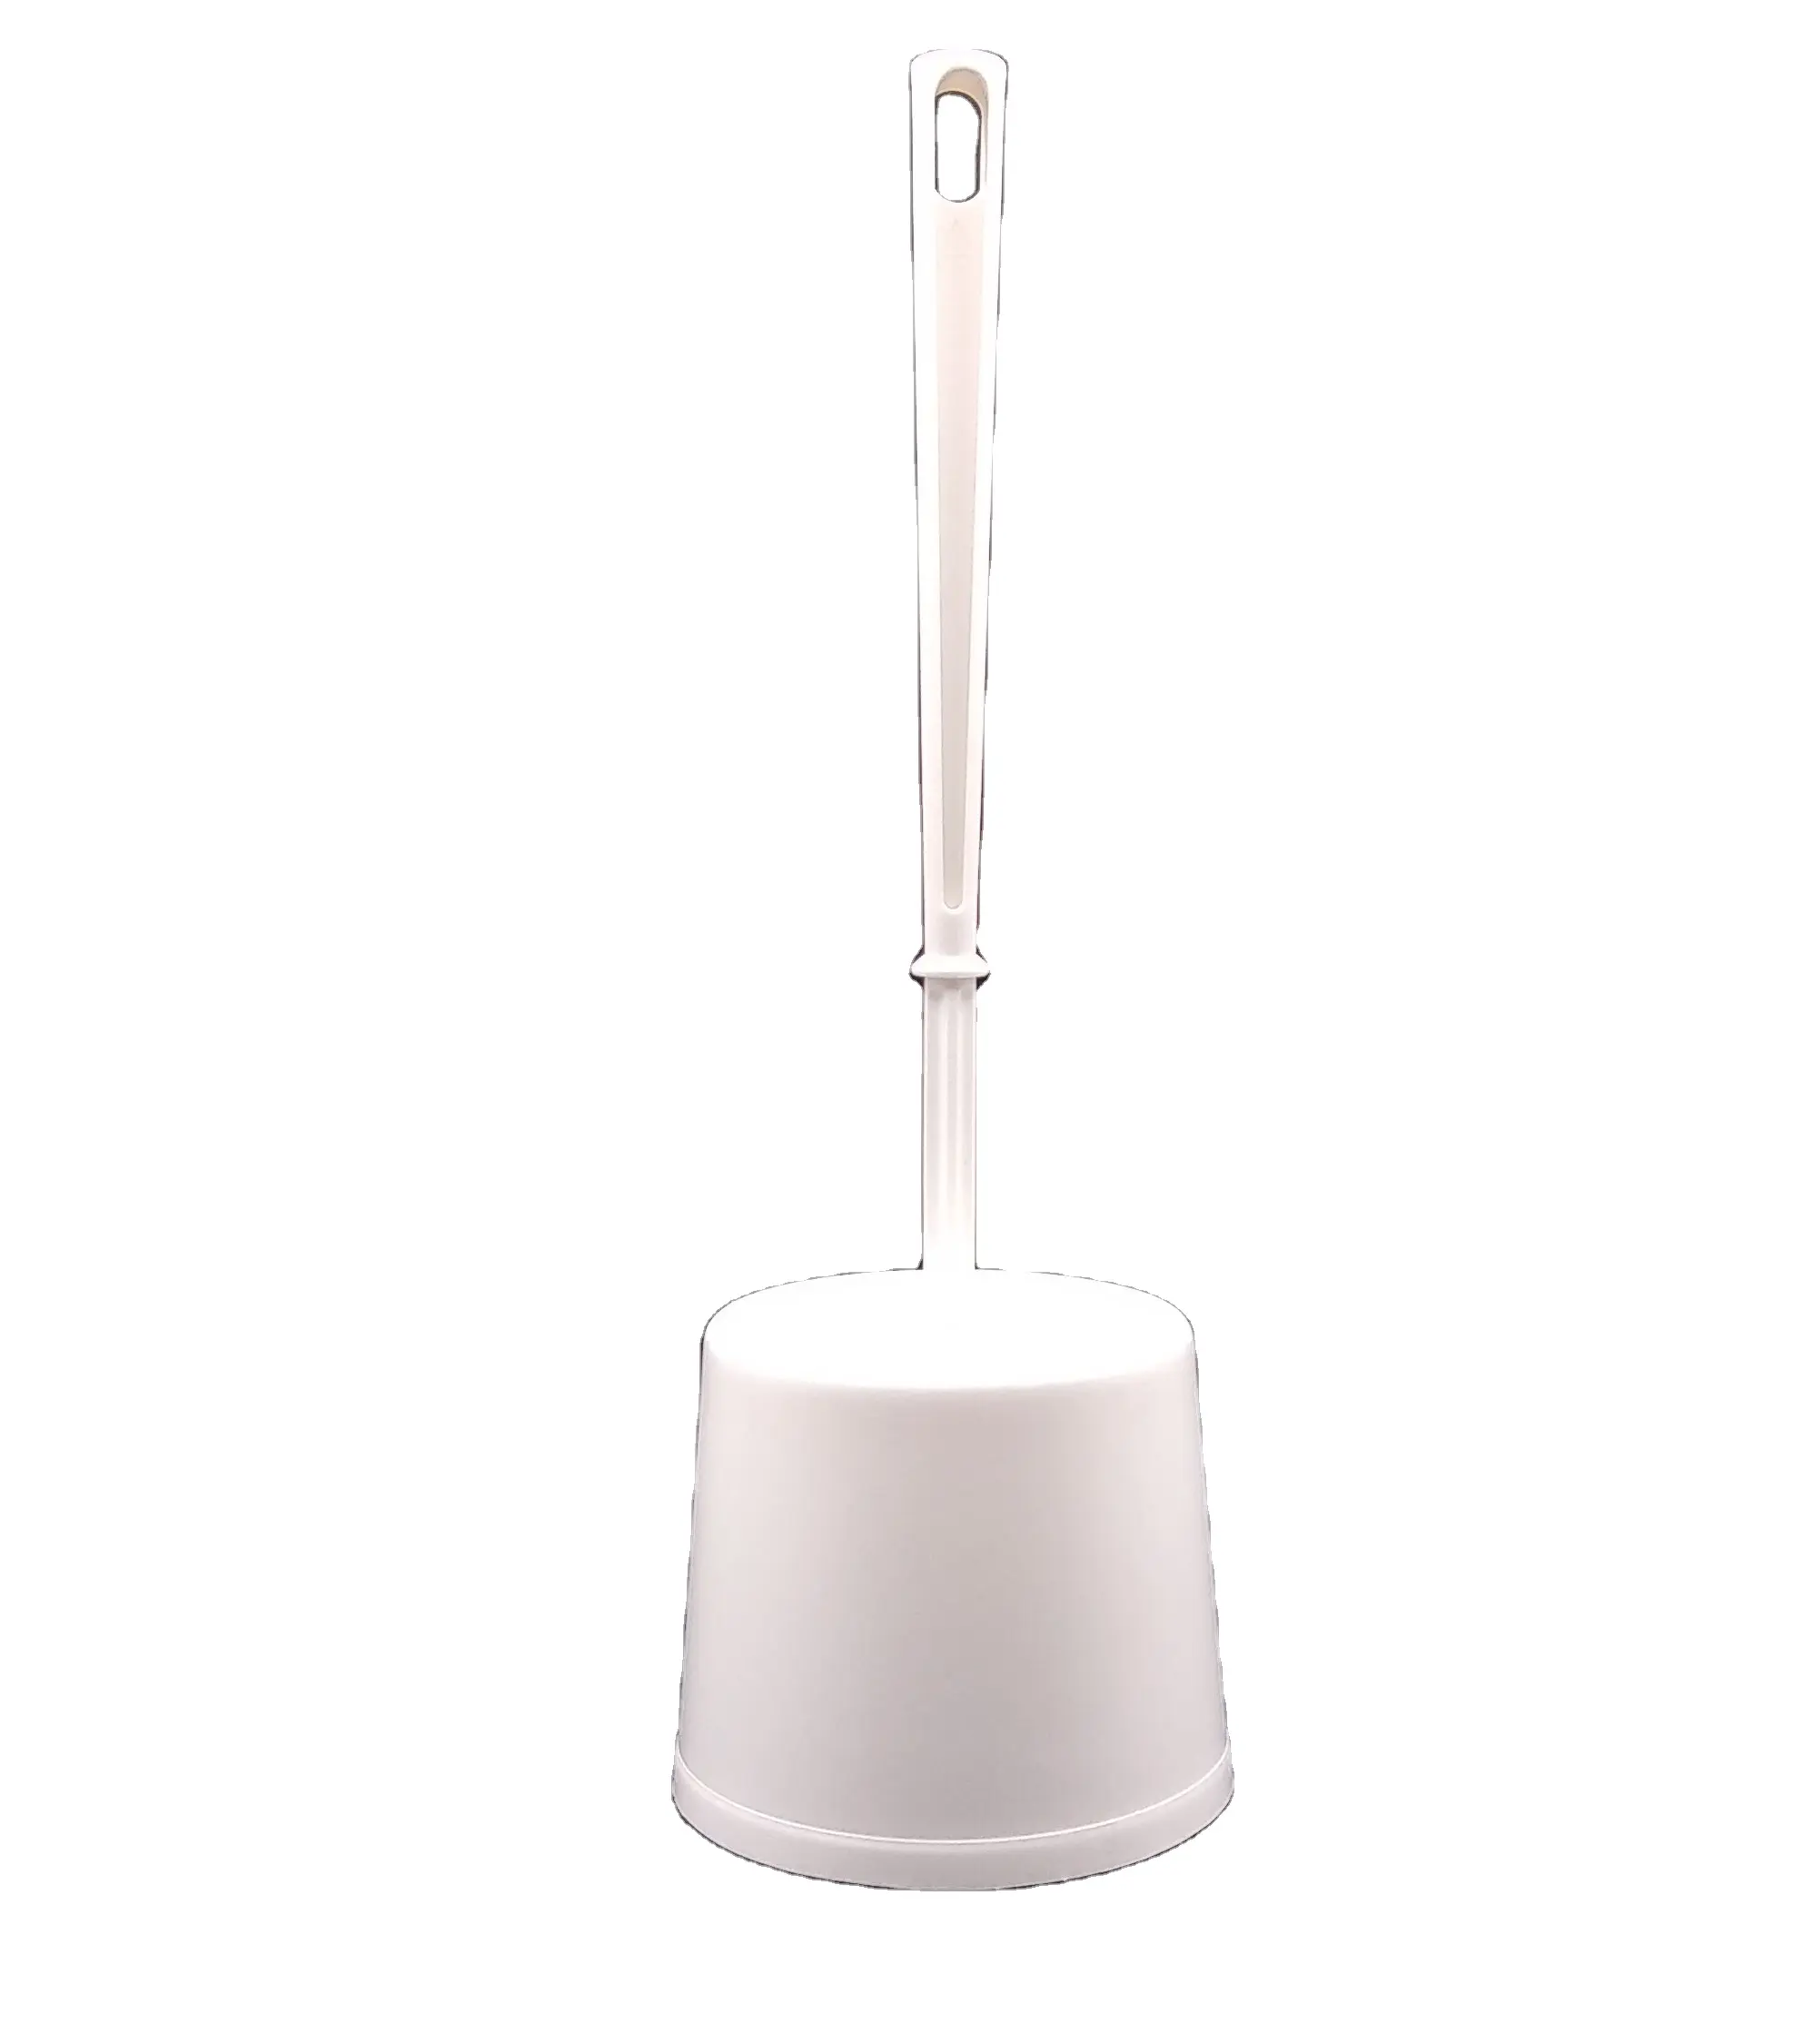 2022 Top Quality Economic WC Plastic Toilet Brush for Cleaning Italian Manufactured